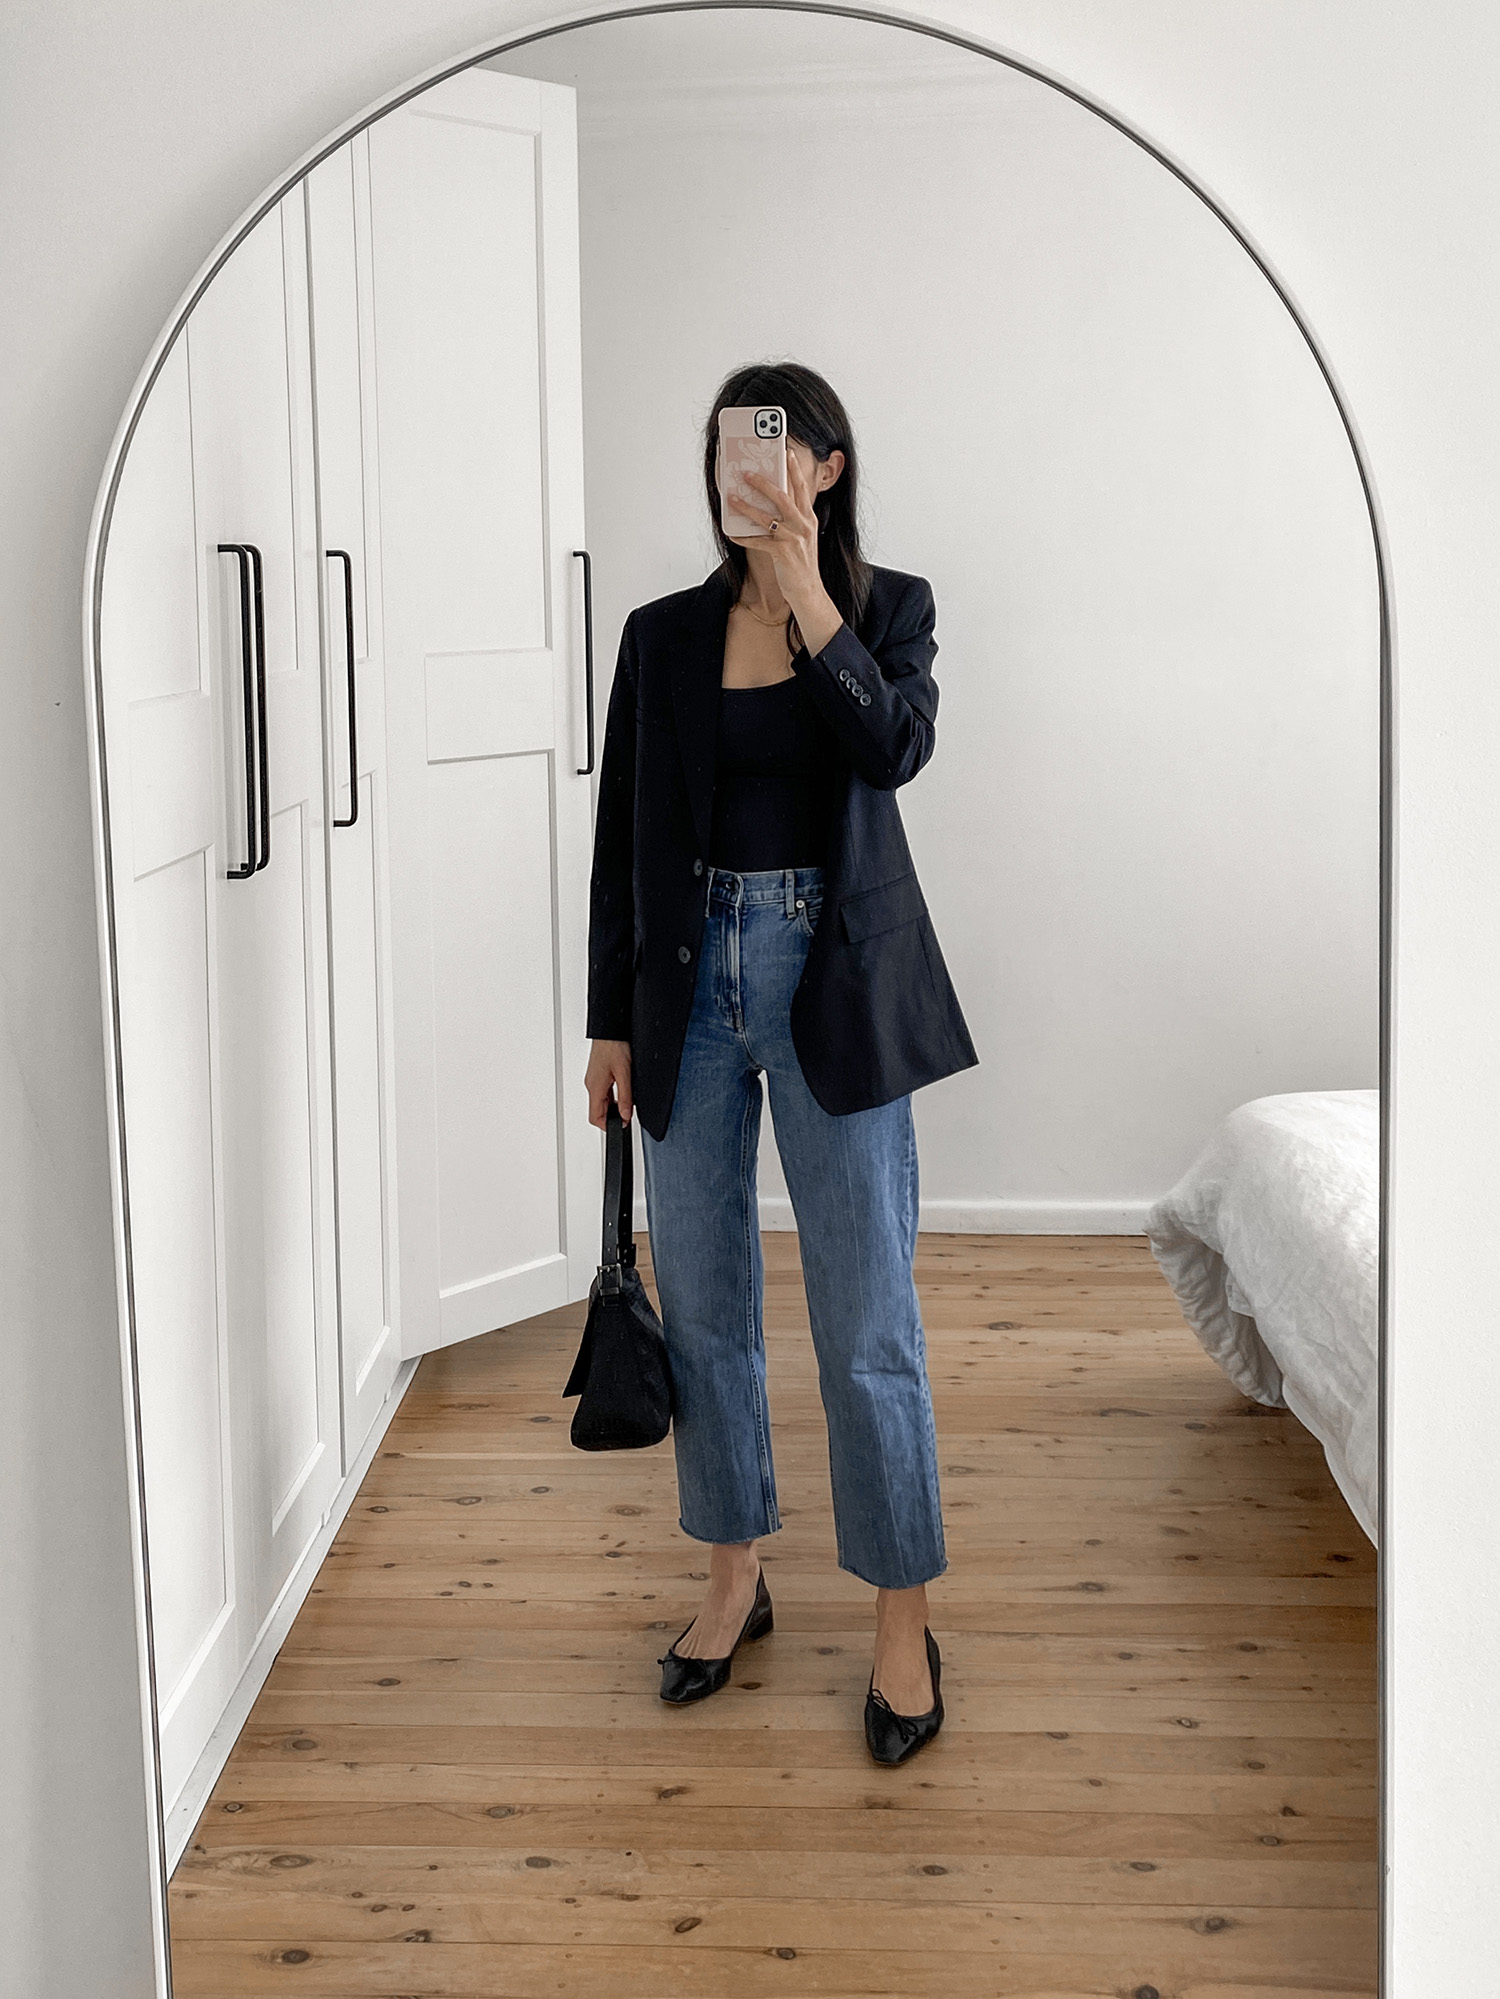 Everlane have 25% off jeans for the next three days